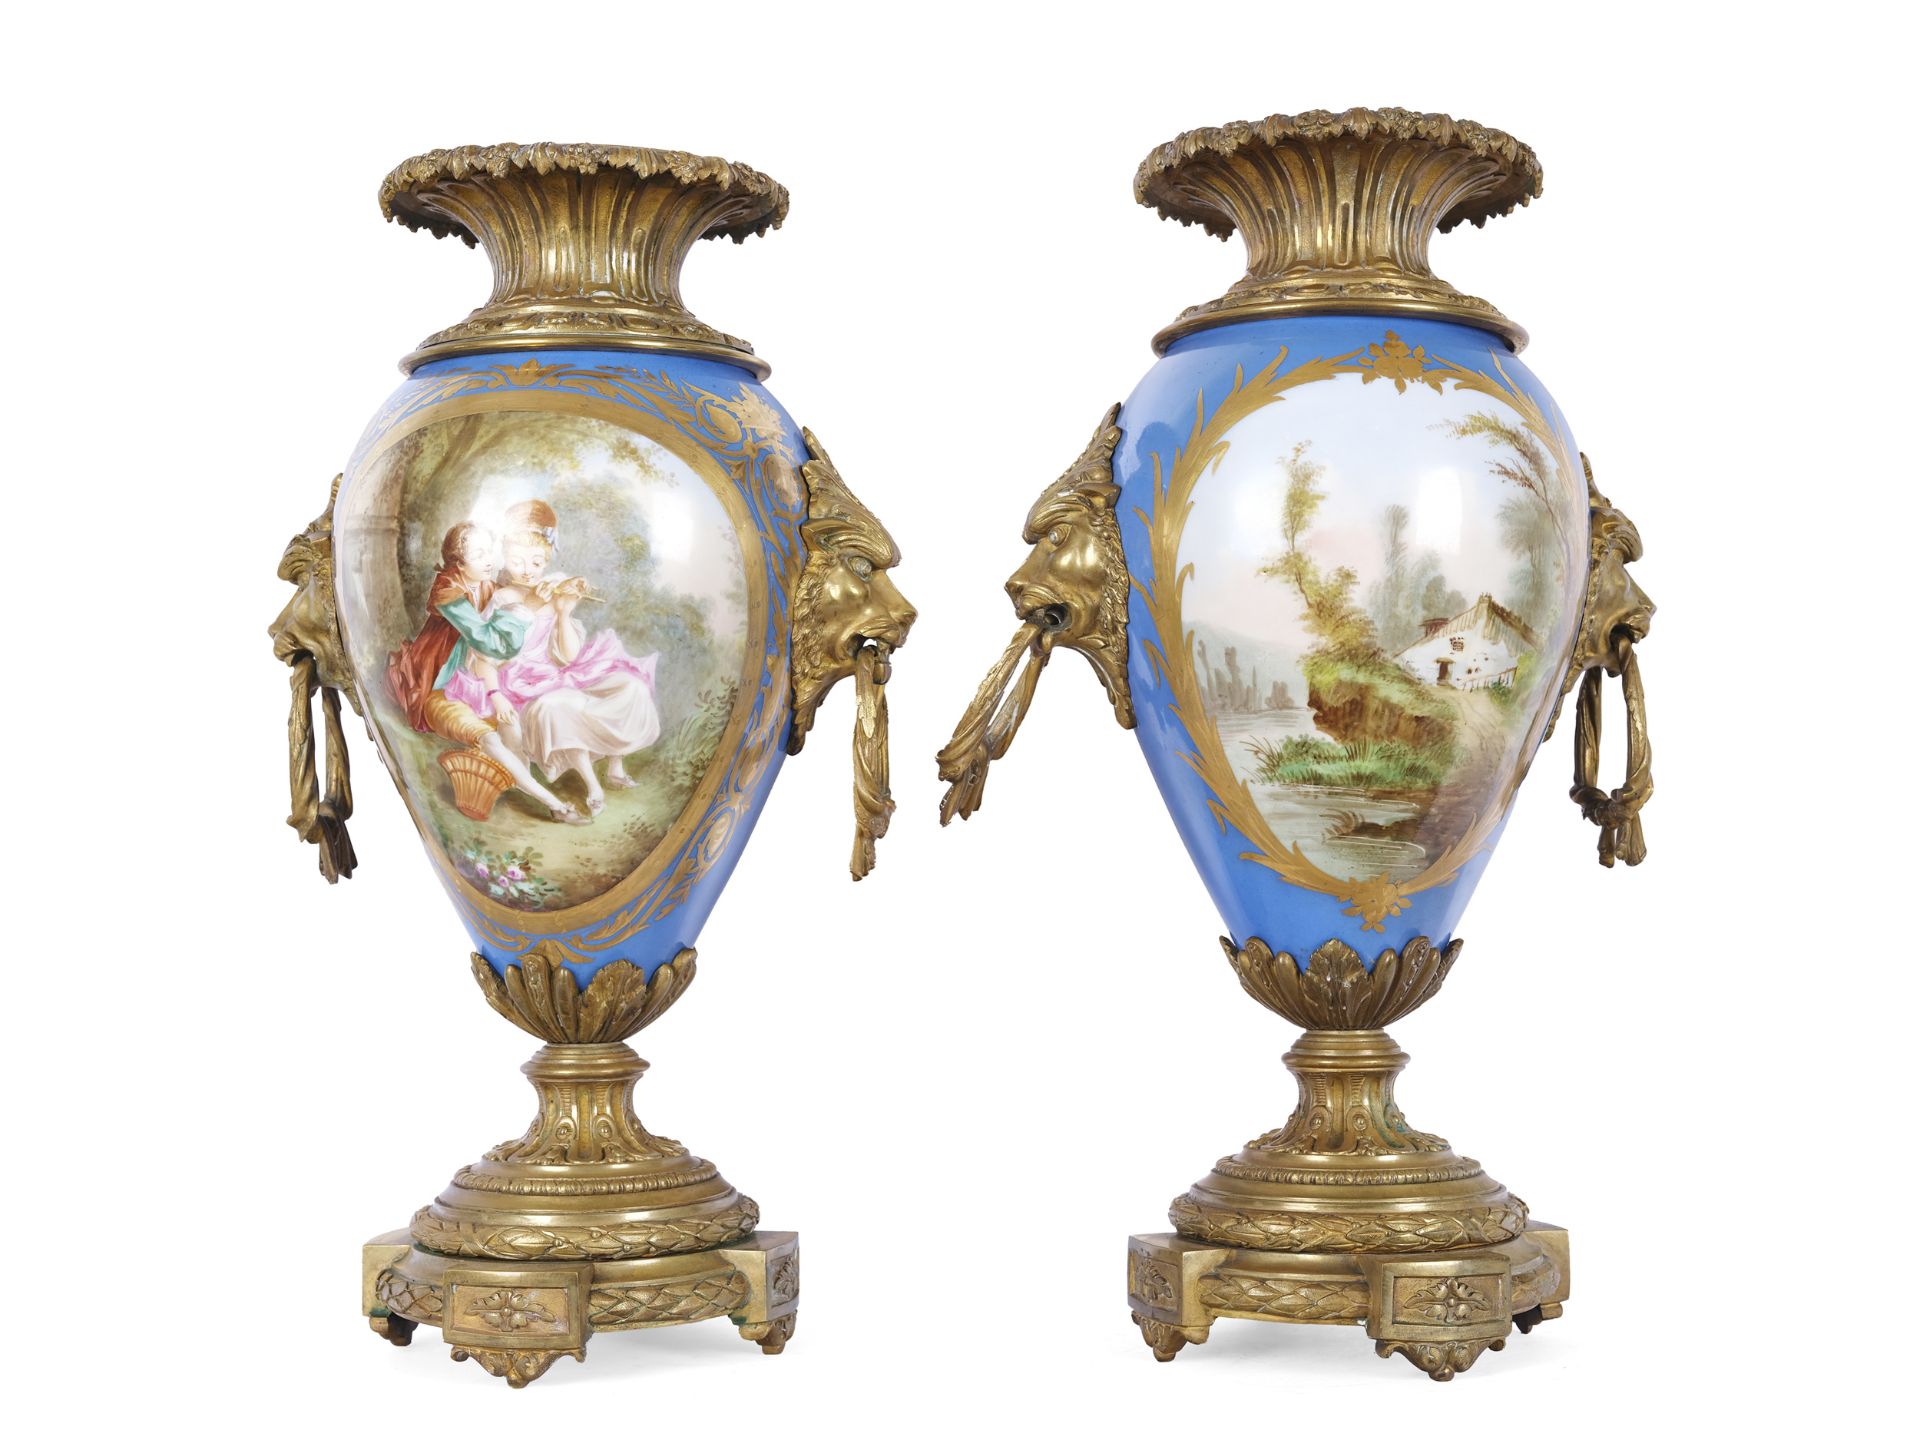 Pair of vases with Watteau scene, Sèvres, Paris, mid 19th century - Image 3 of 3